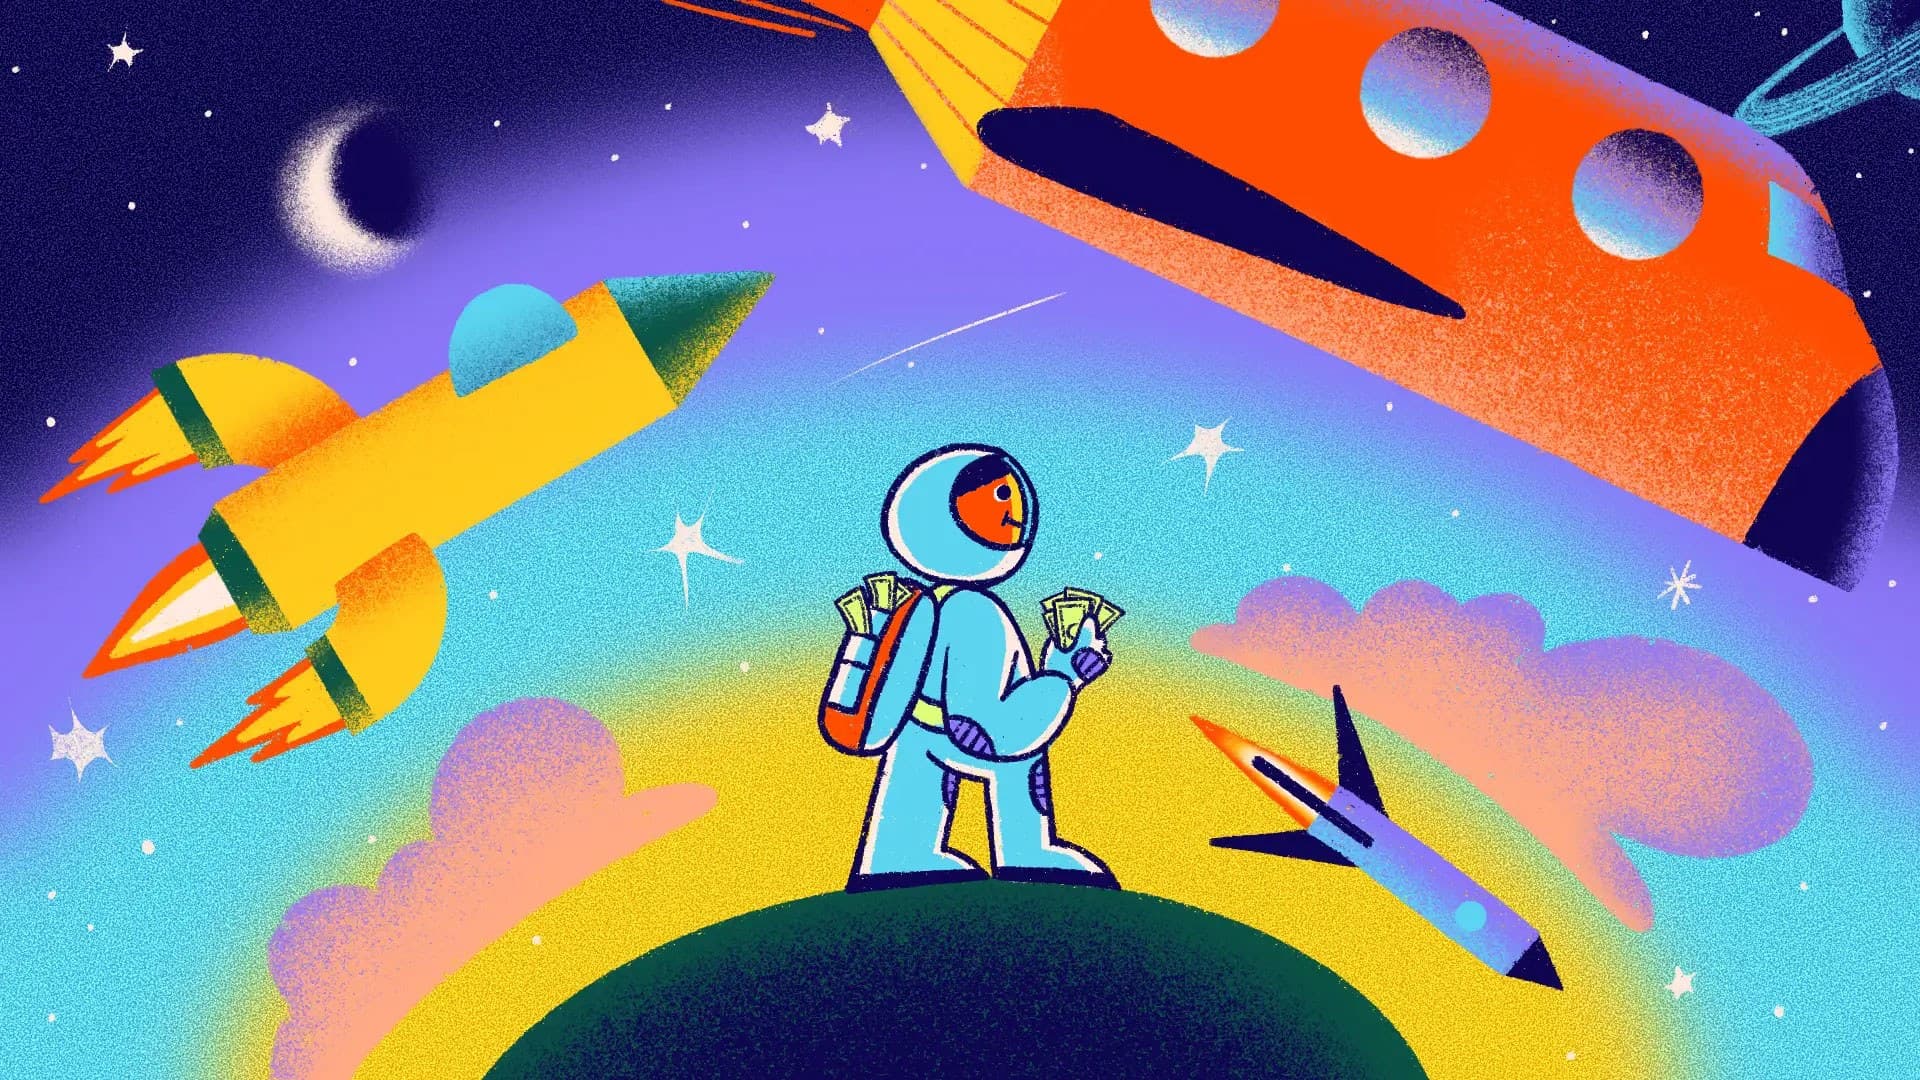 A colorful illustration of a person in a spacesuit standing on a small planet, holding a map. Three rockets in red, yellow, and blue are flying in different directions through a vibrant starry sky. The scene is whimsical and imaginative.